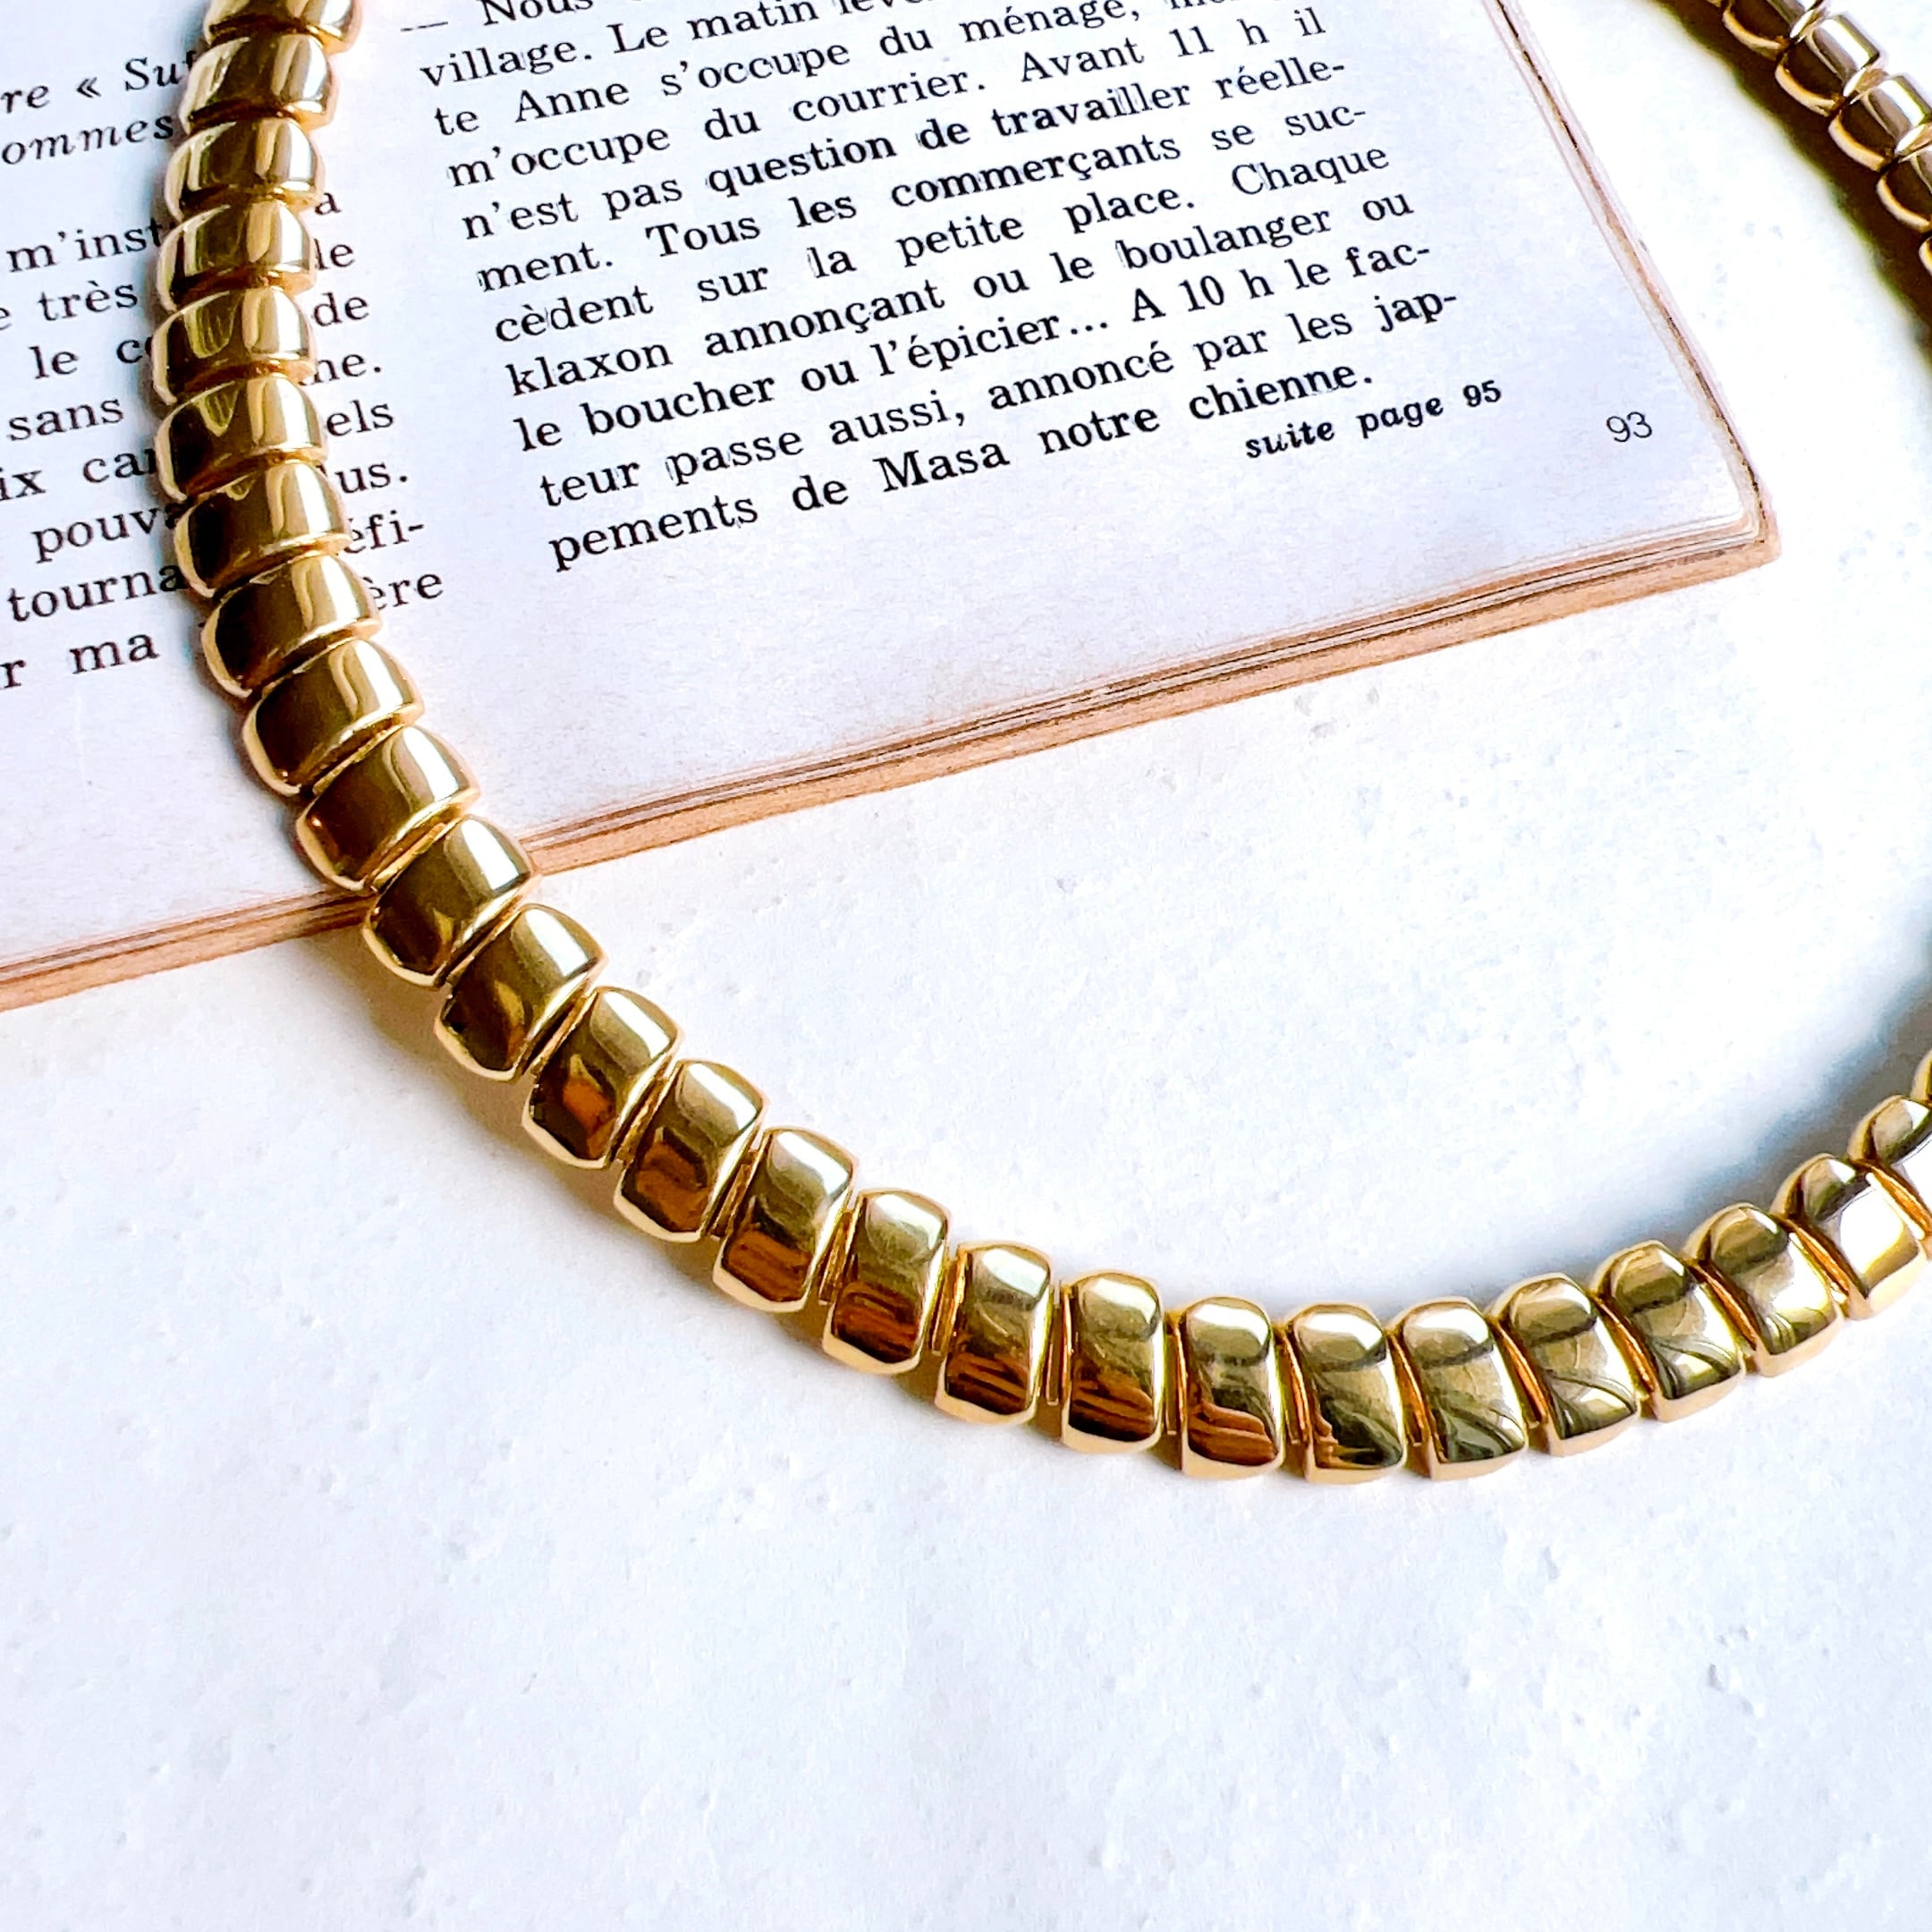 NM41-【 MONET 】モネ・ヴィンテージネックレス　1980s Shiny gold-tone short necklace with  square plates